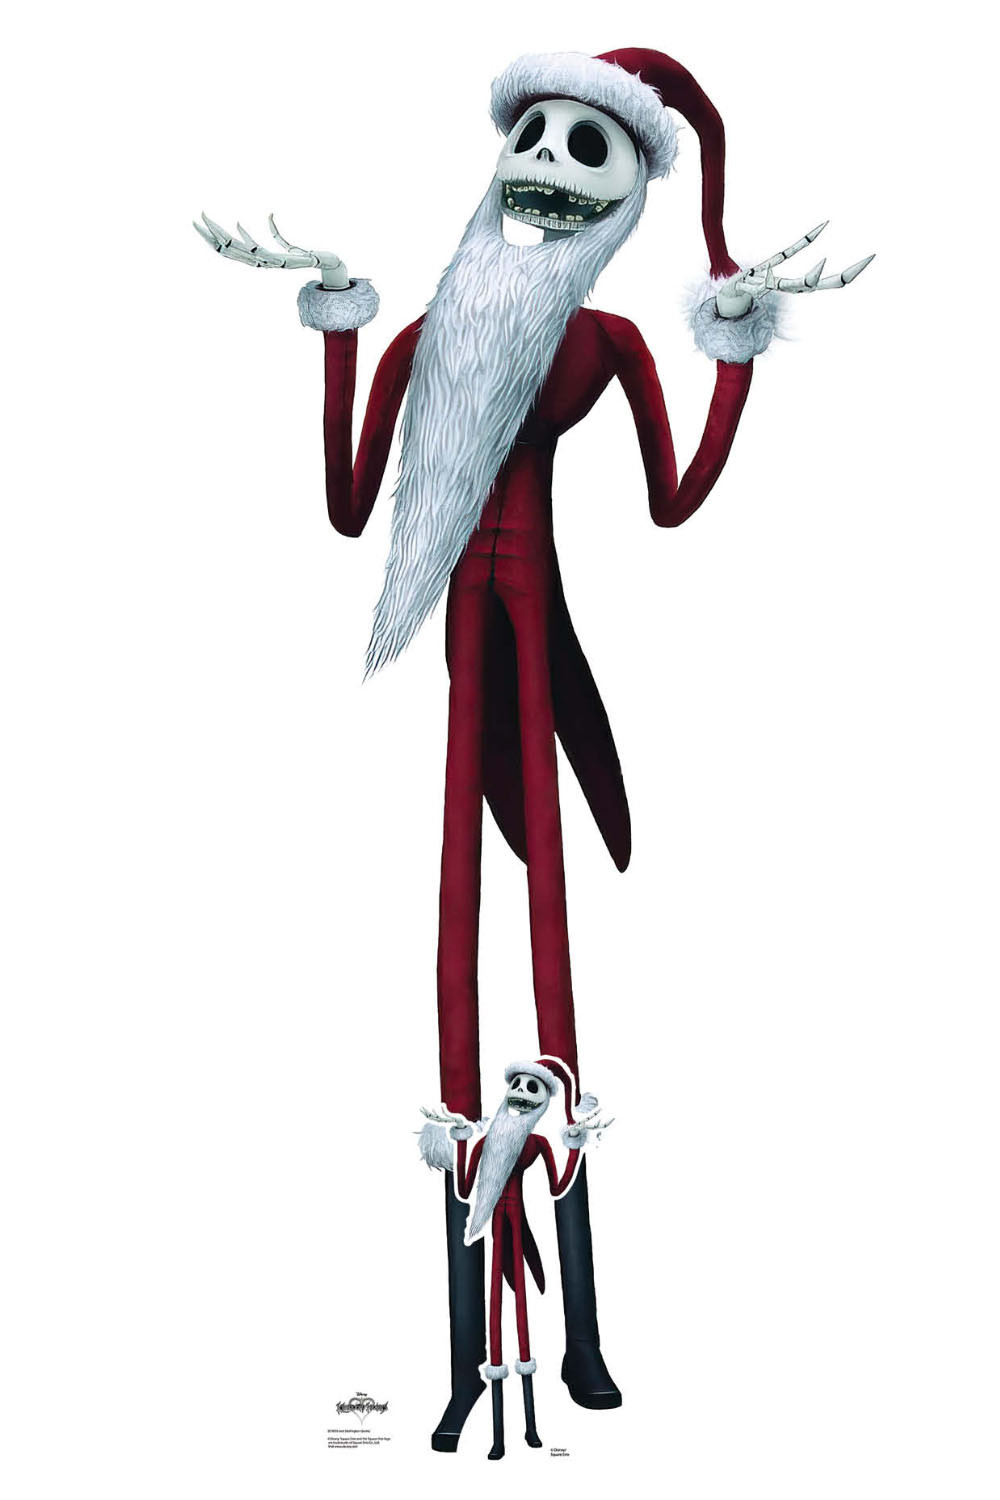 https://cdn11.bigcommerce.com/s-ydriczk/images/stencil/1500x1500/products/89597/95553/Jack-Skellington-wearing-Santa-Suit-The-Nightmare-Before-Christmas-official-Cardboard-Cutout-buy-now-at-starstills__66200.1634743009.jpg?c=2